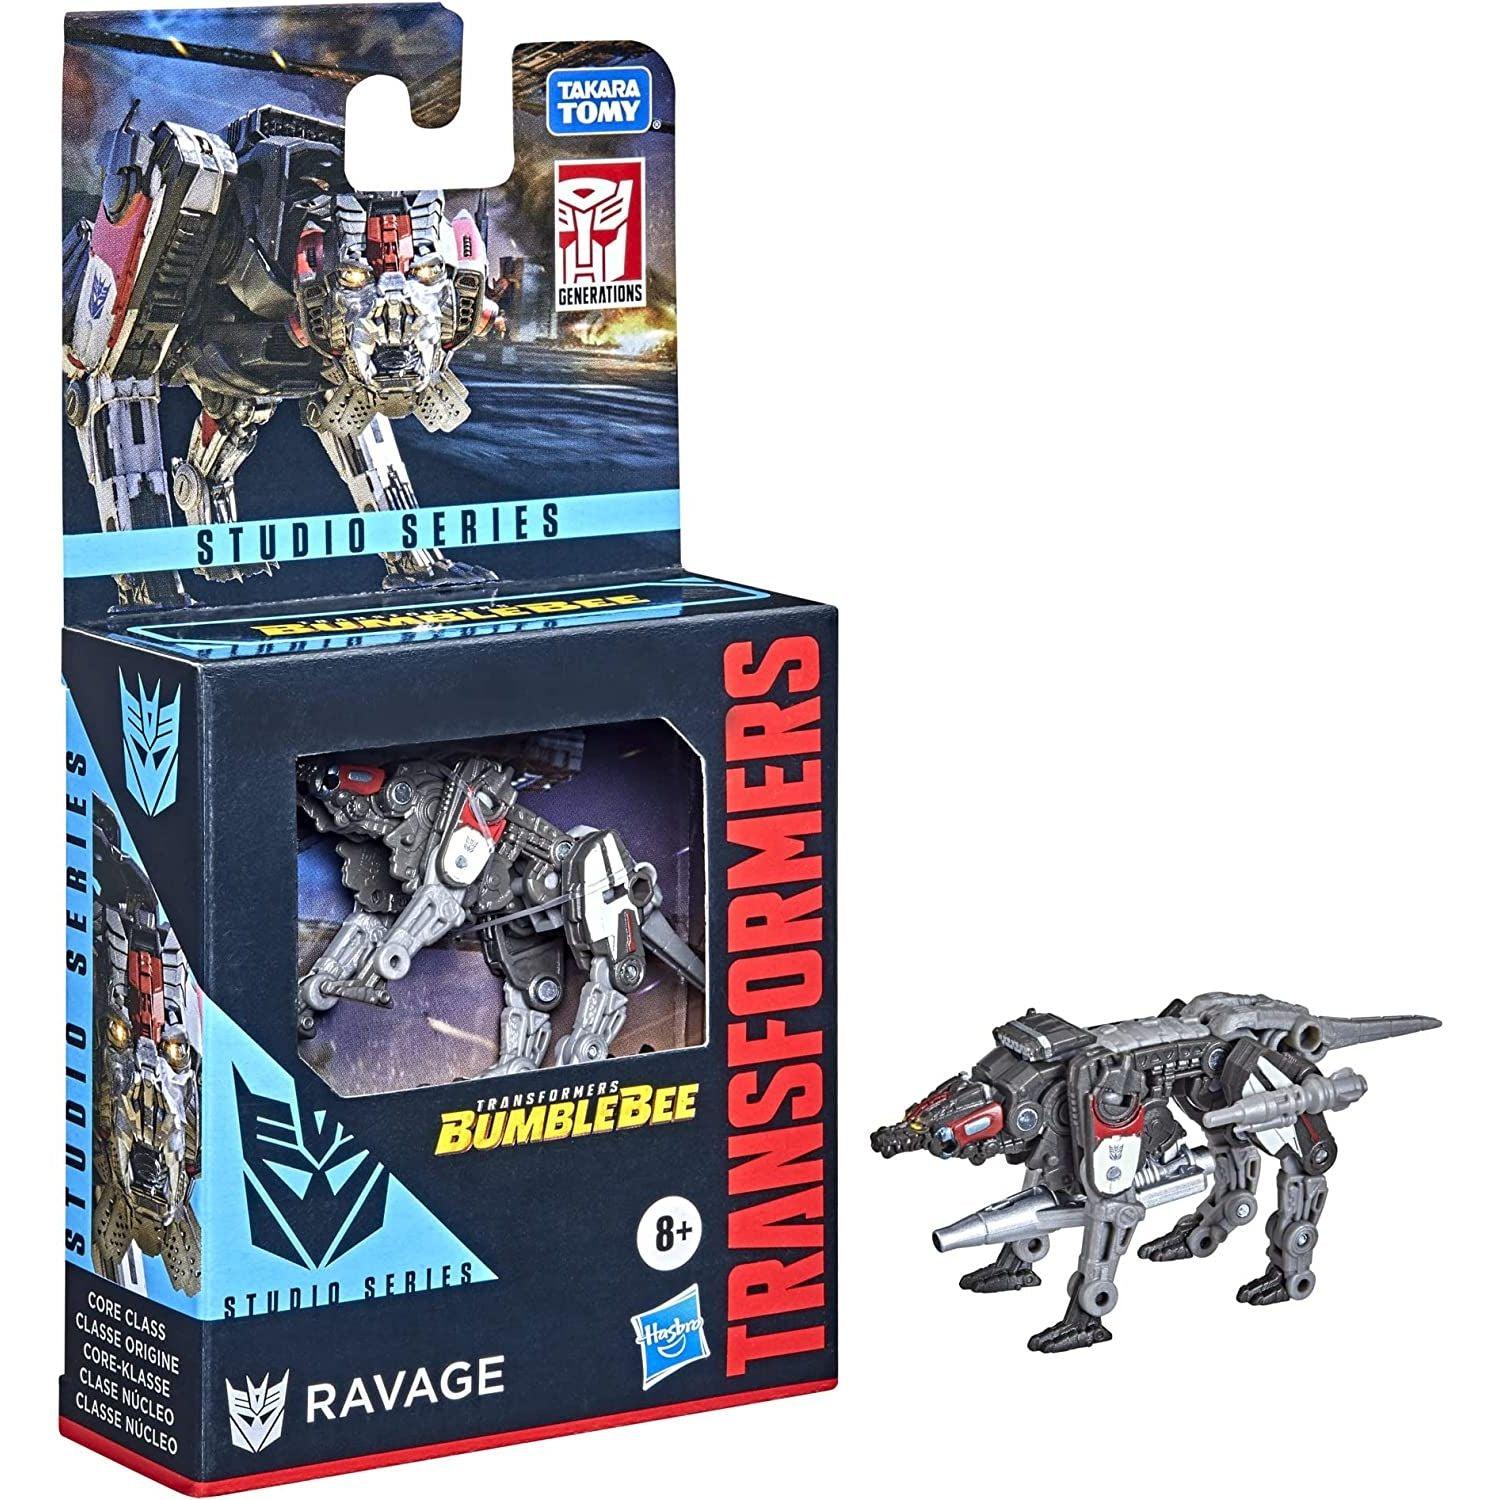 Transformers Toys Studio Series Core Class Bumblebee Ravage Action Figure - BumbleToys - 6+ Years, 8+ Years, 8-13 Years, Action Figures, Boys, Figures, Pre-Order, Transformers